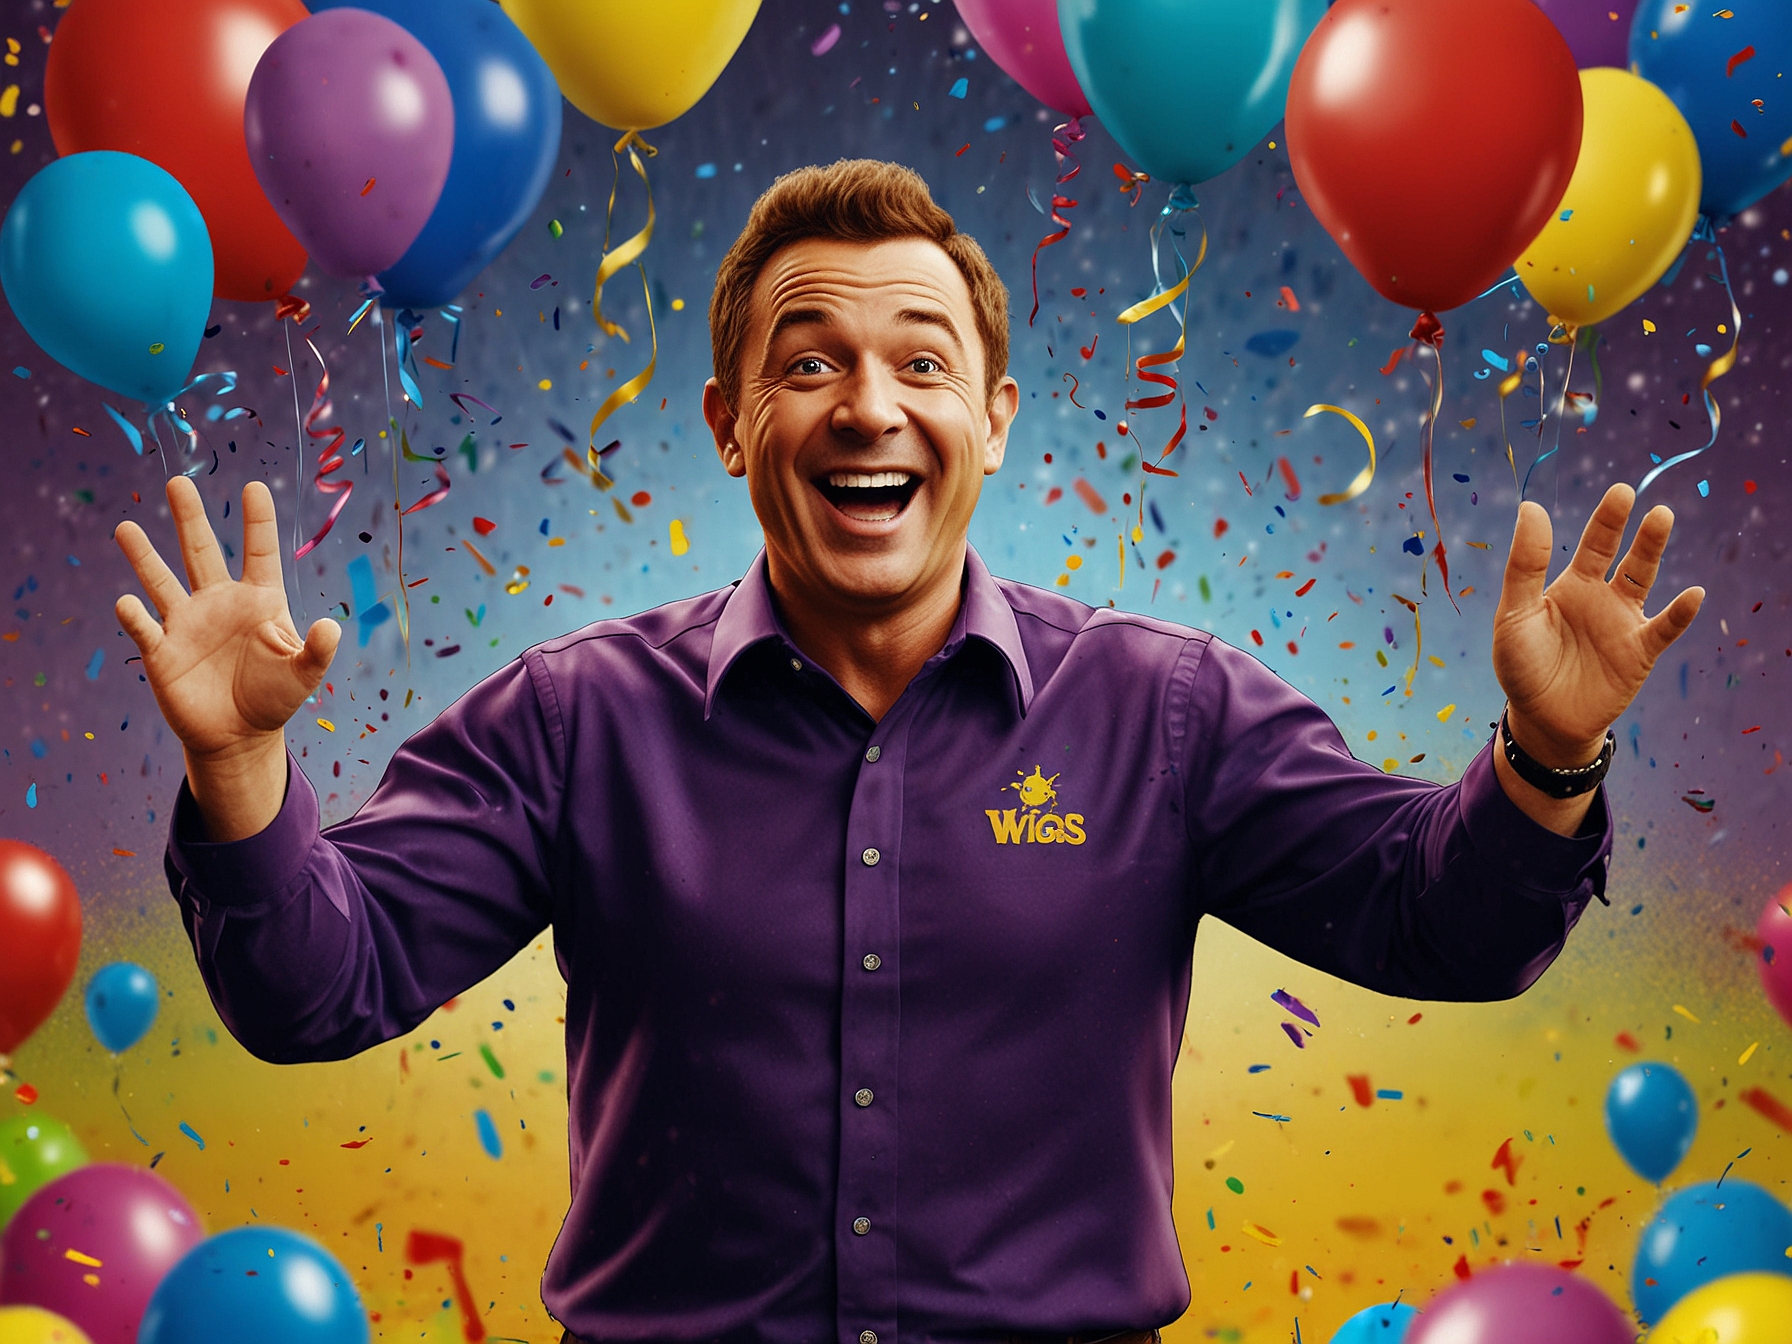 A joyful image of the Wiggles star smiling brightly, surrounded by colorful balloons and confetti, representing the happiness of the major life announcement.